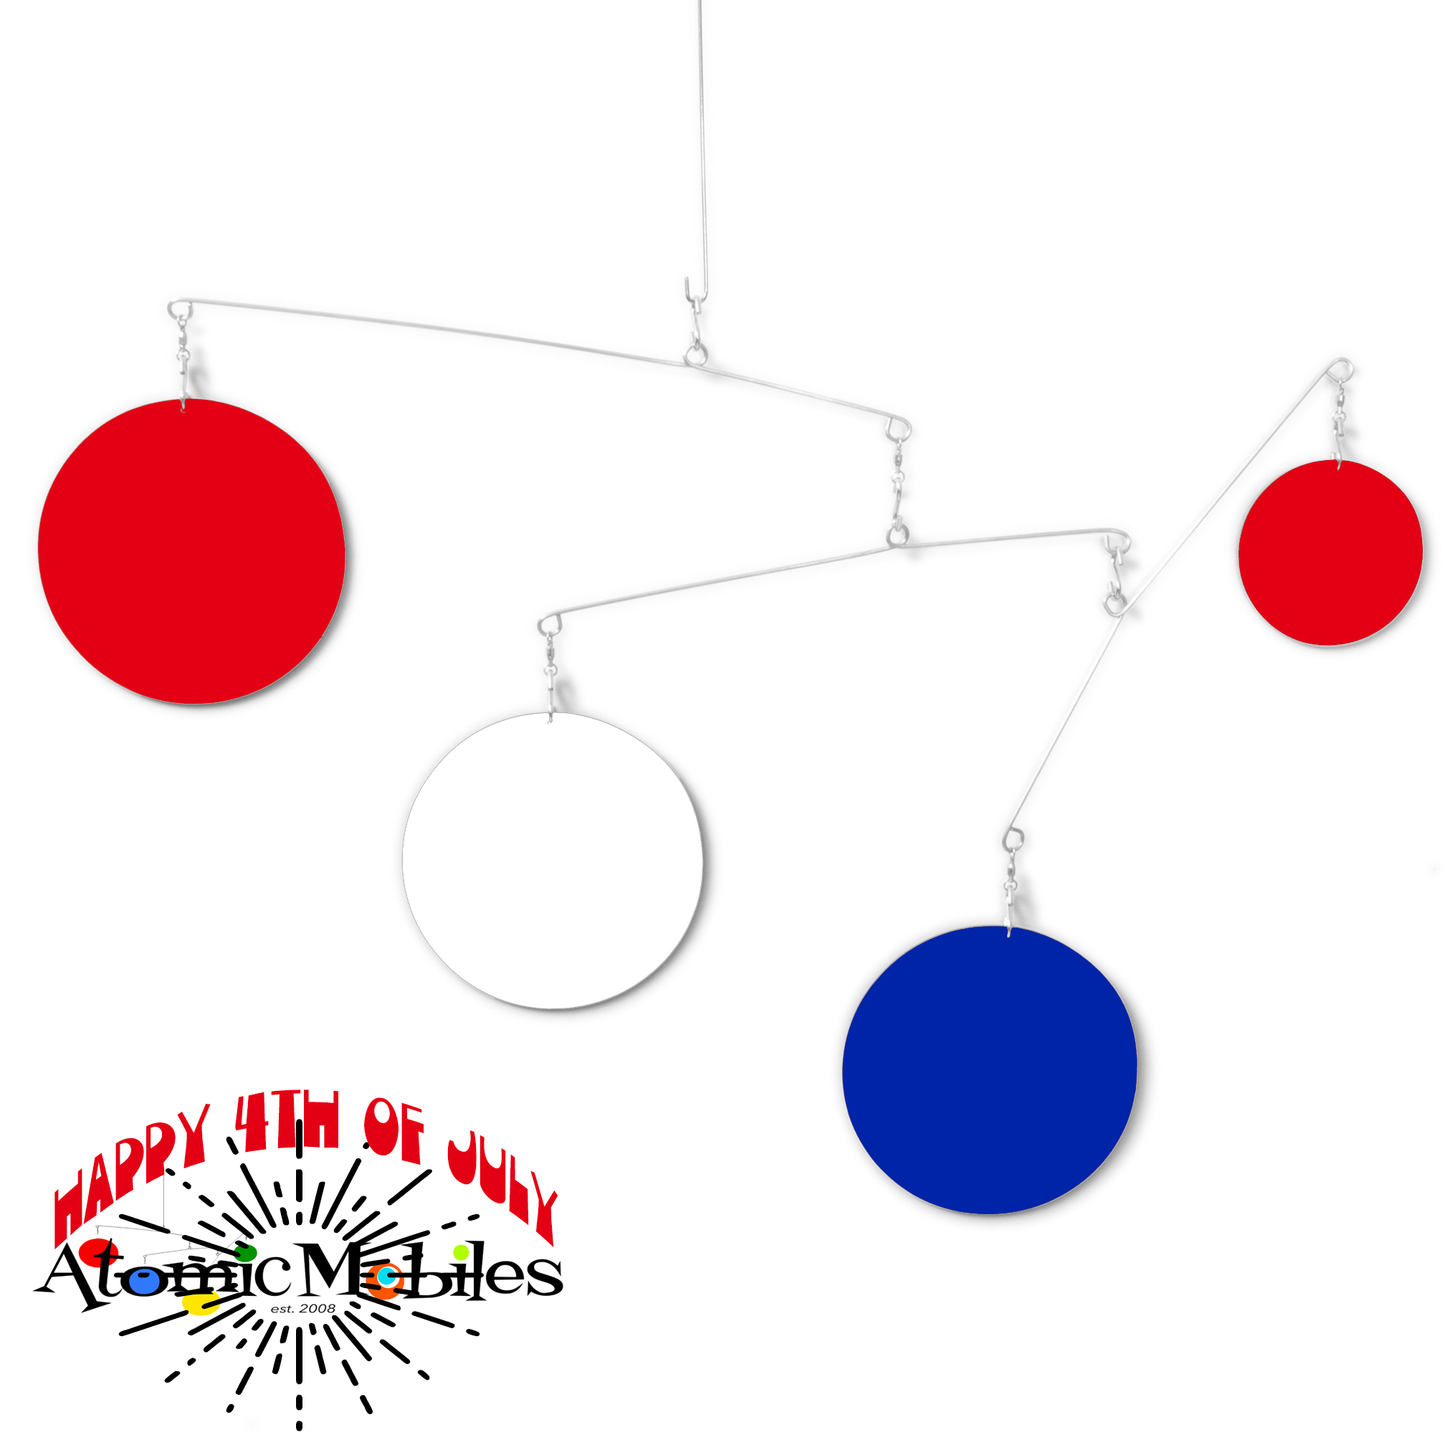 Unique 4th of July Decoration - kinetic hanging art mobile in 4th of July colors of Red White and Blue by AtomicMobiles.com